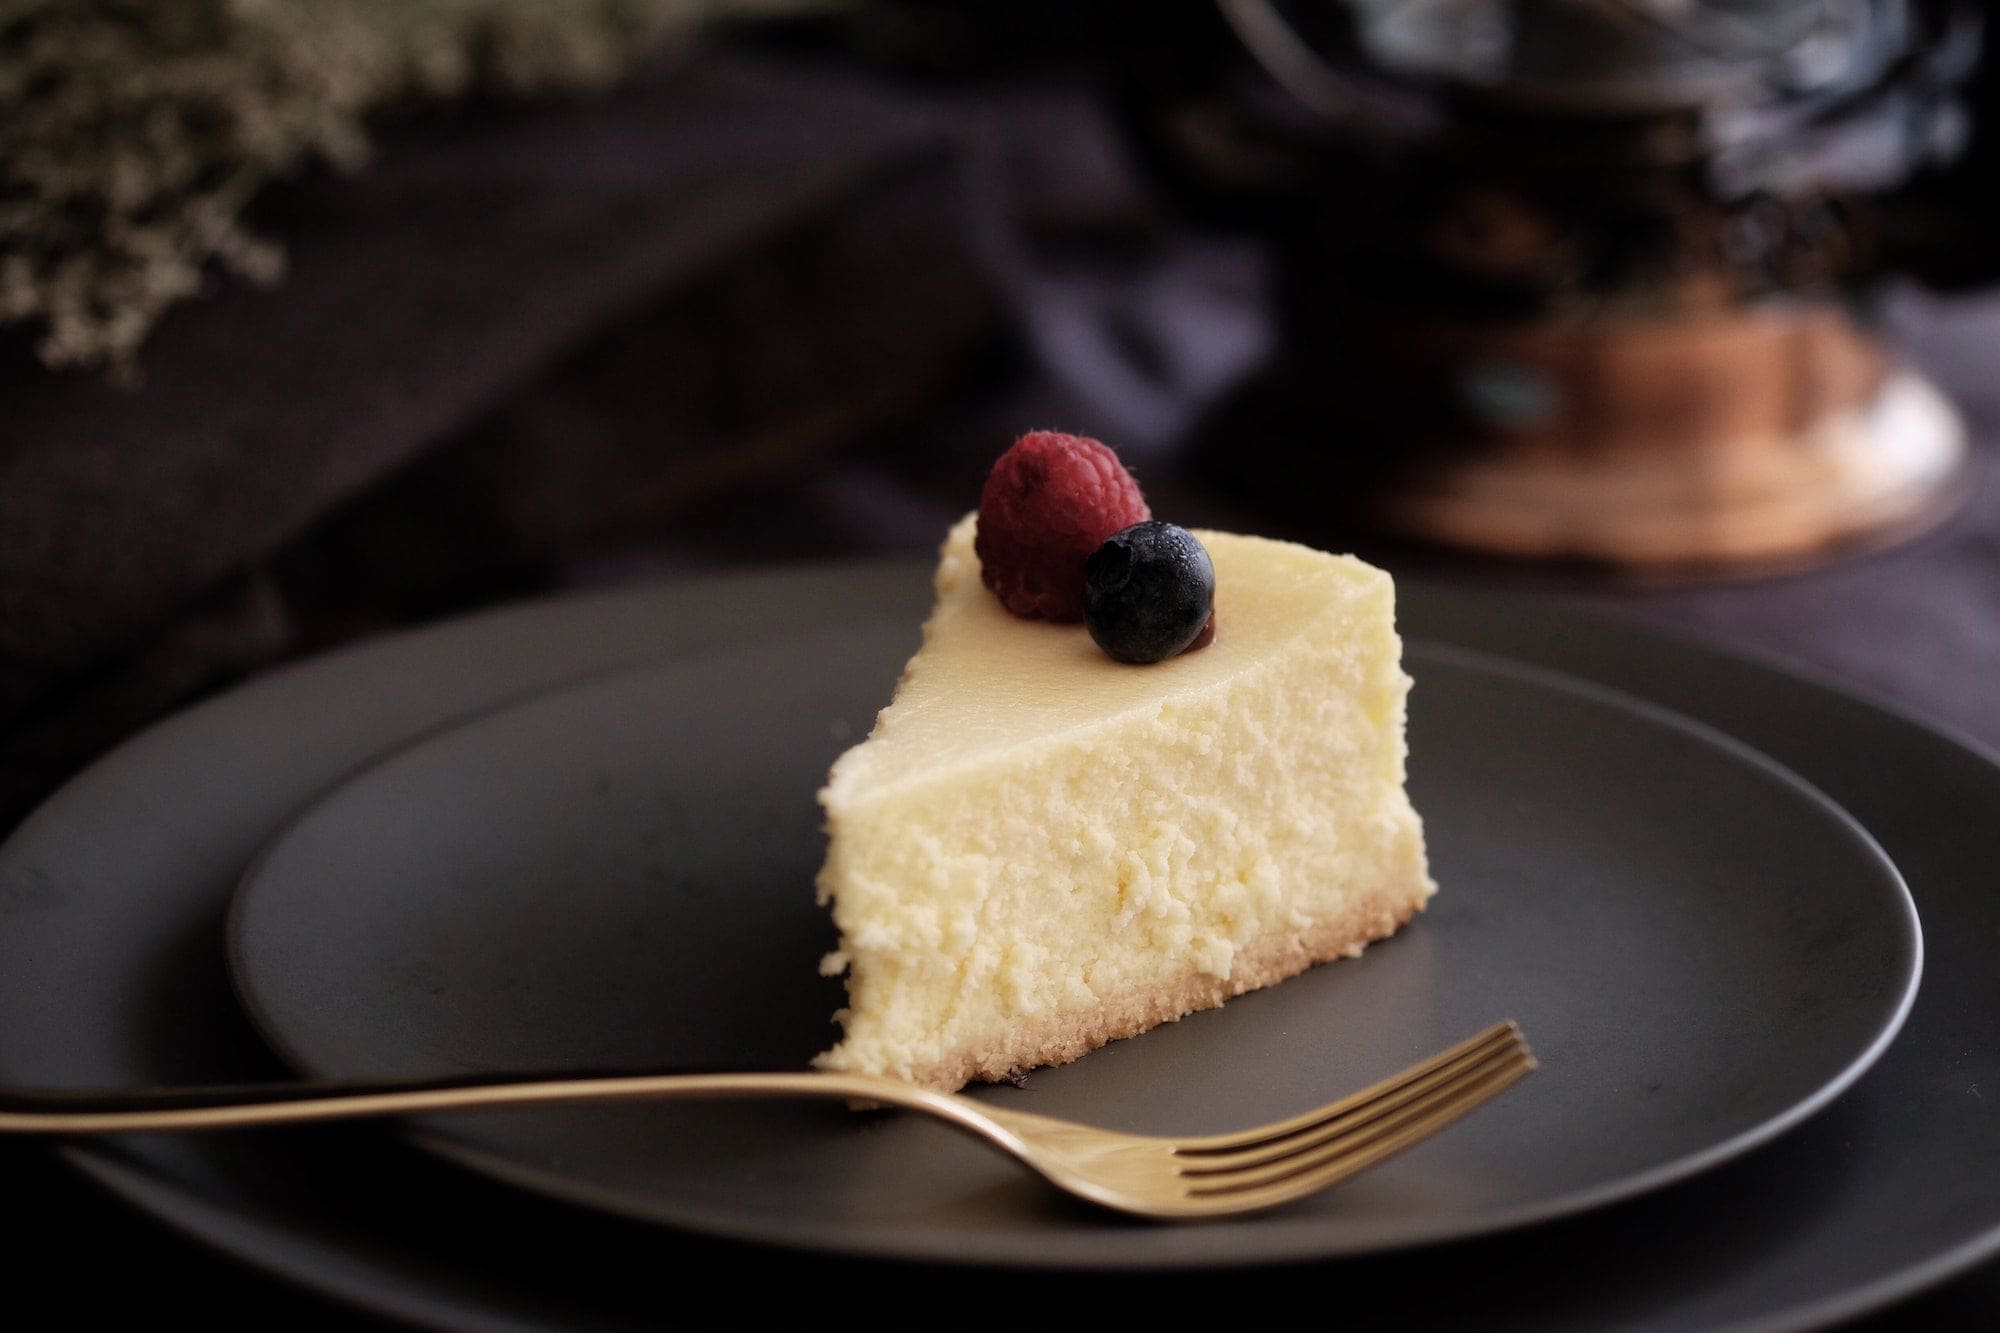 Places where you can get the best good ol’ classic cheesecakes